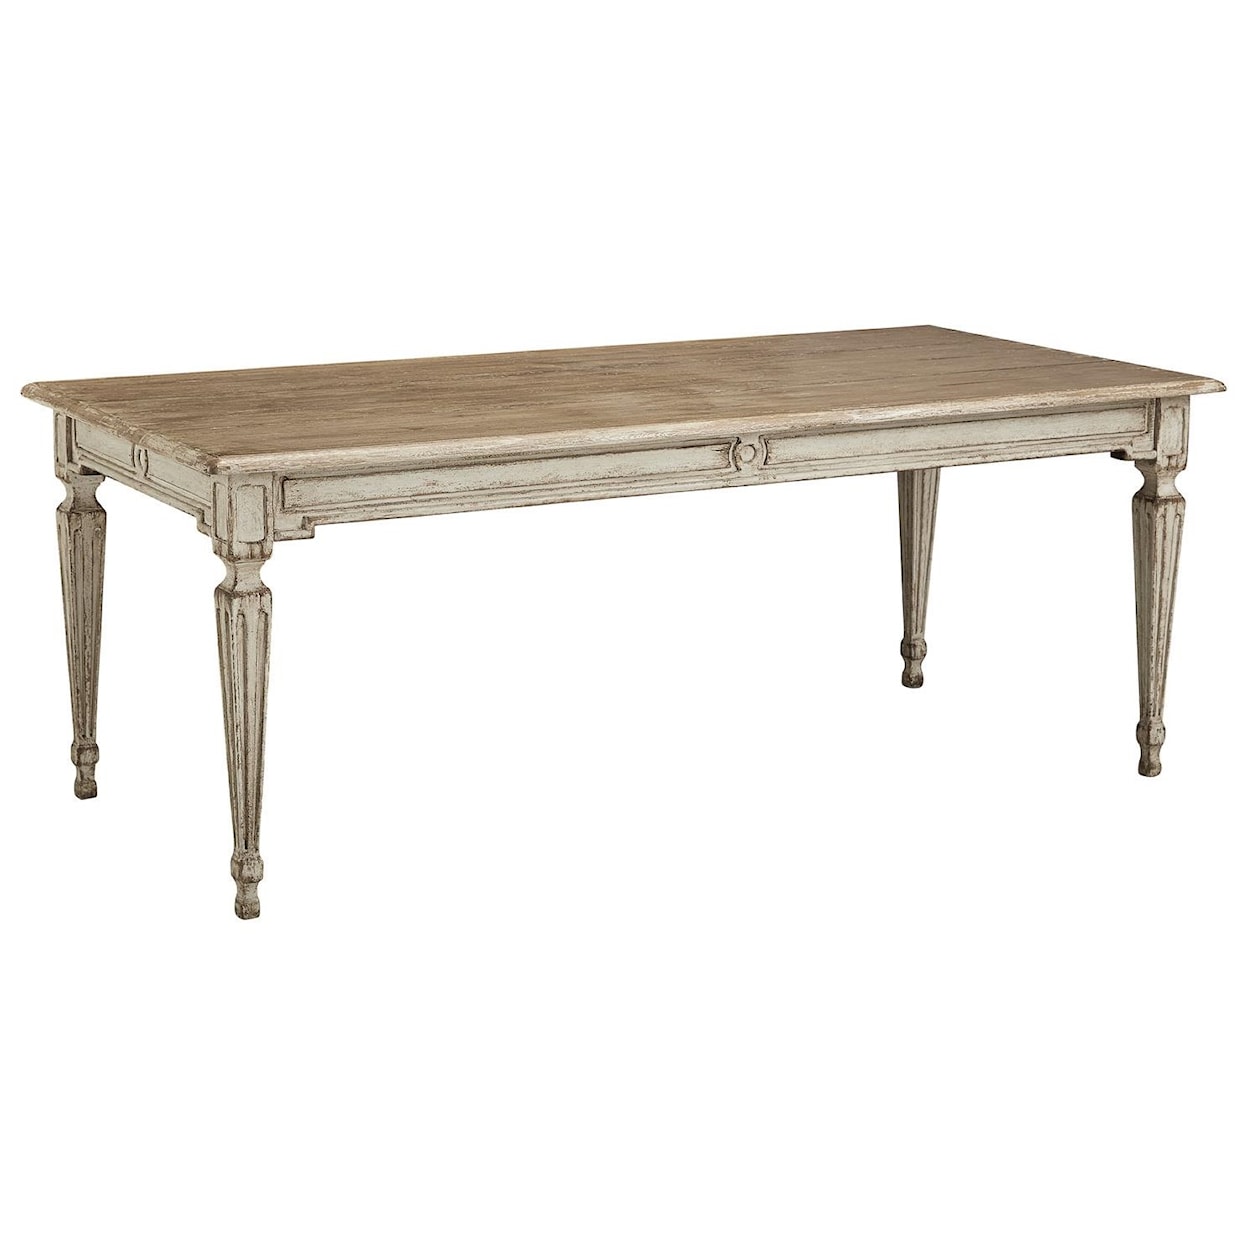 Furniture Classics Chest and Dining Petersburg Dining Room Table